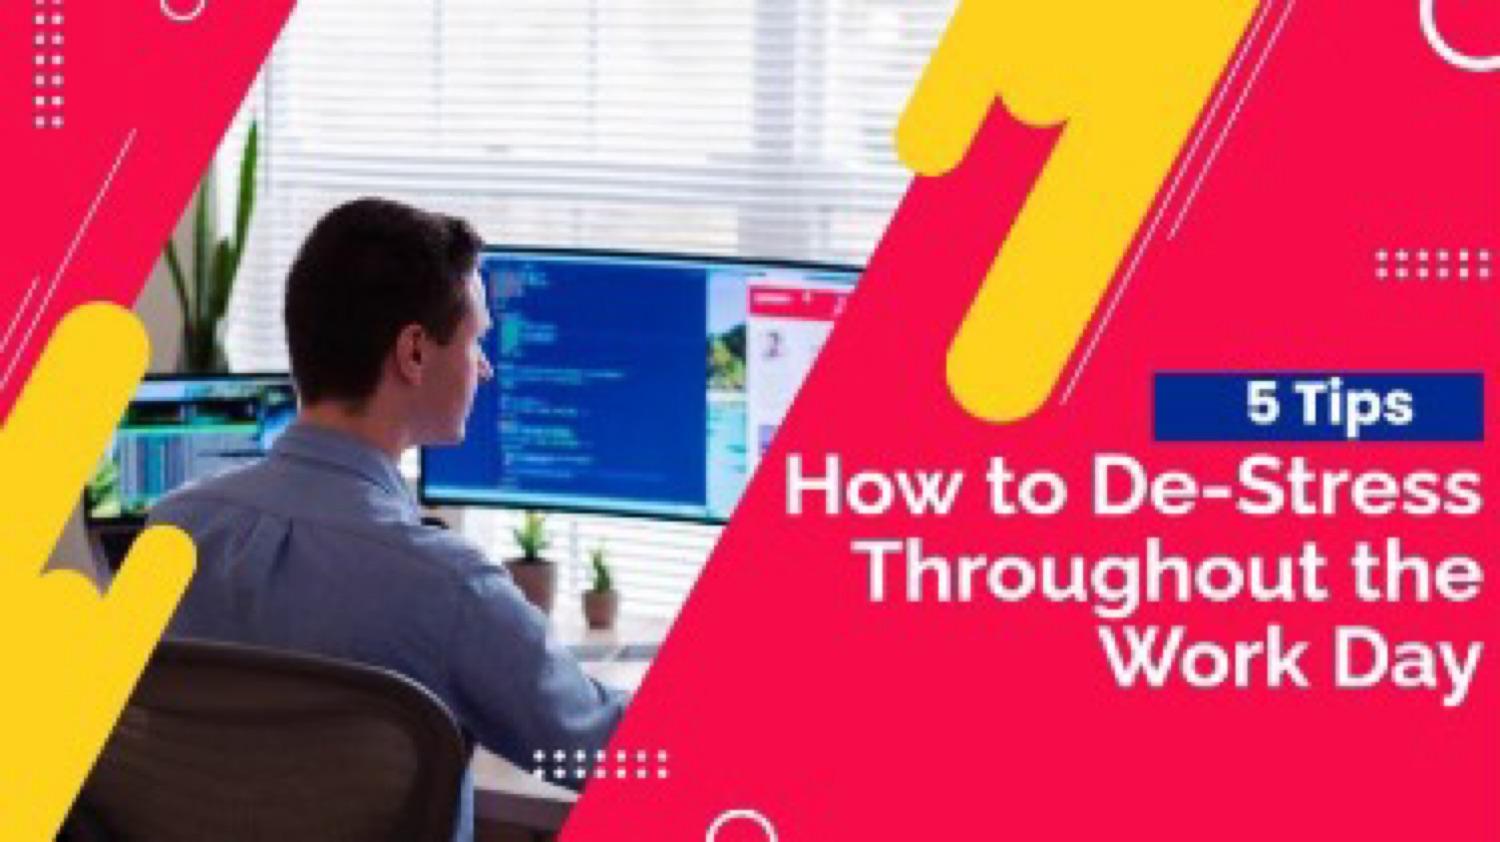 Tips How to De-Stress Throughout the Work Day